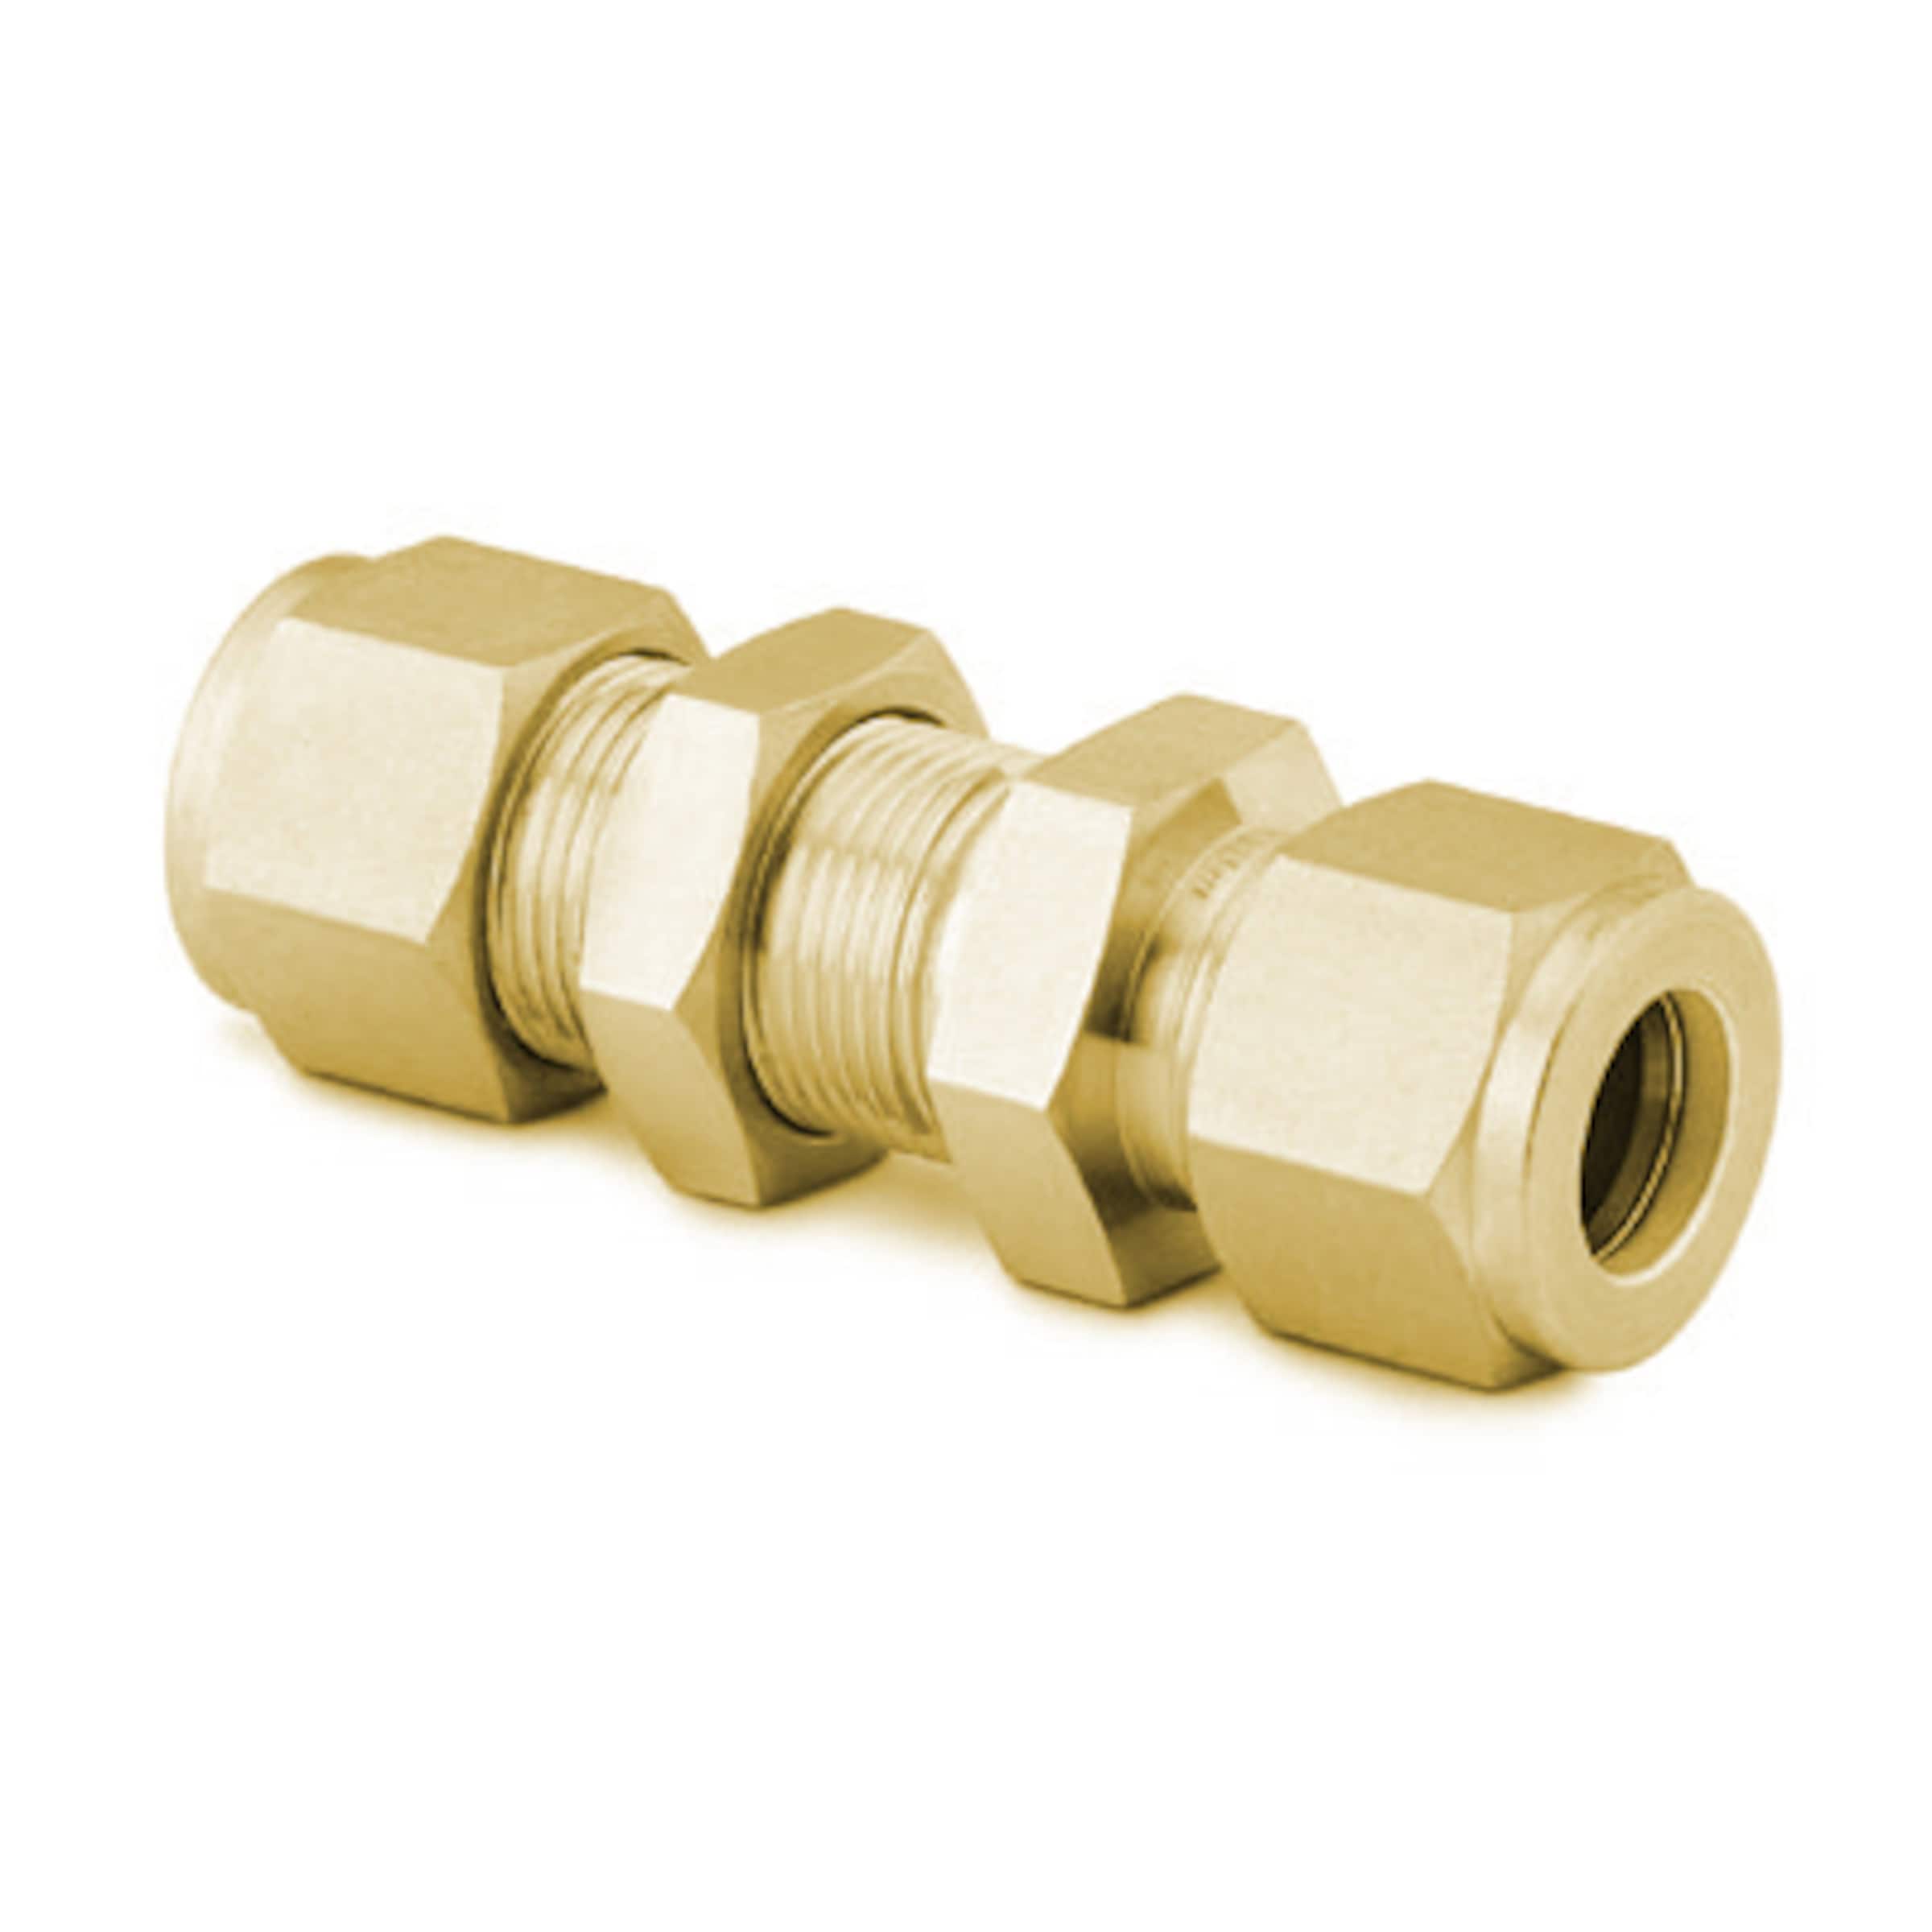 Brass Swagelok Tube Fitting, Bulkhead Union, 1/2 in. Tube OD, Bulkheads, Tube Fittings and Adapters, Fittings, All Products